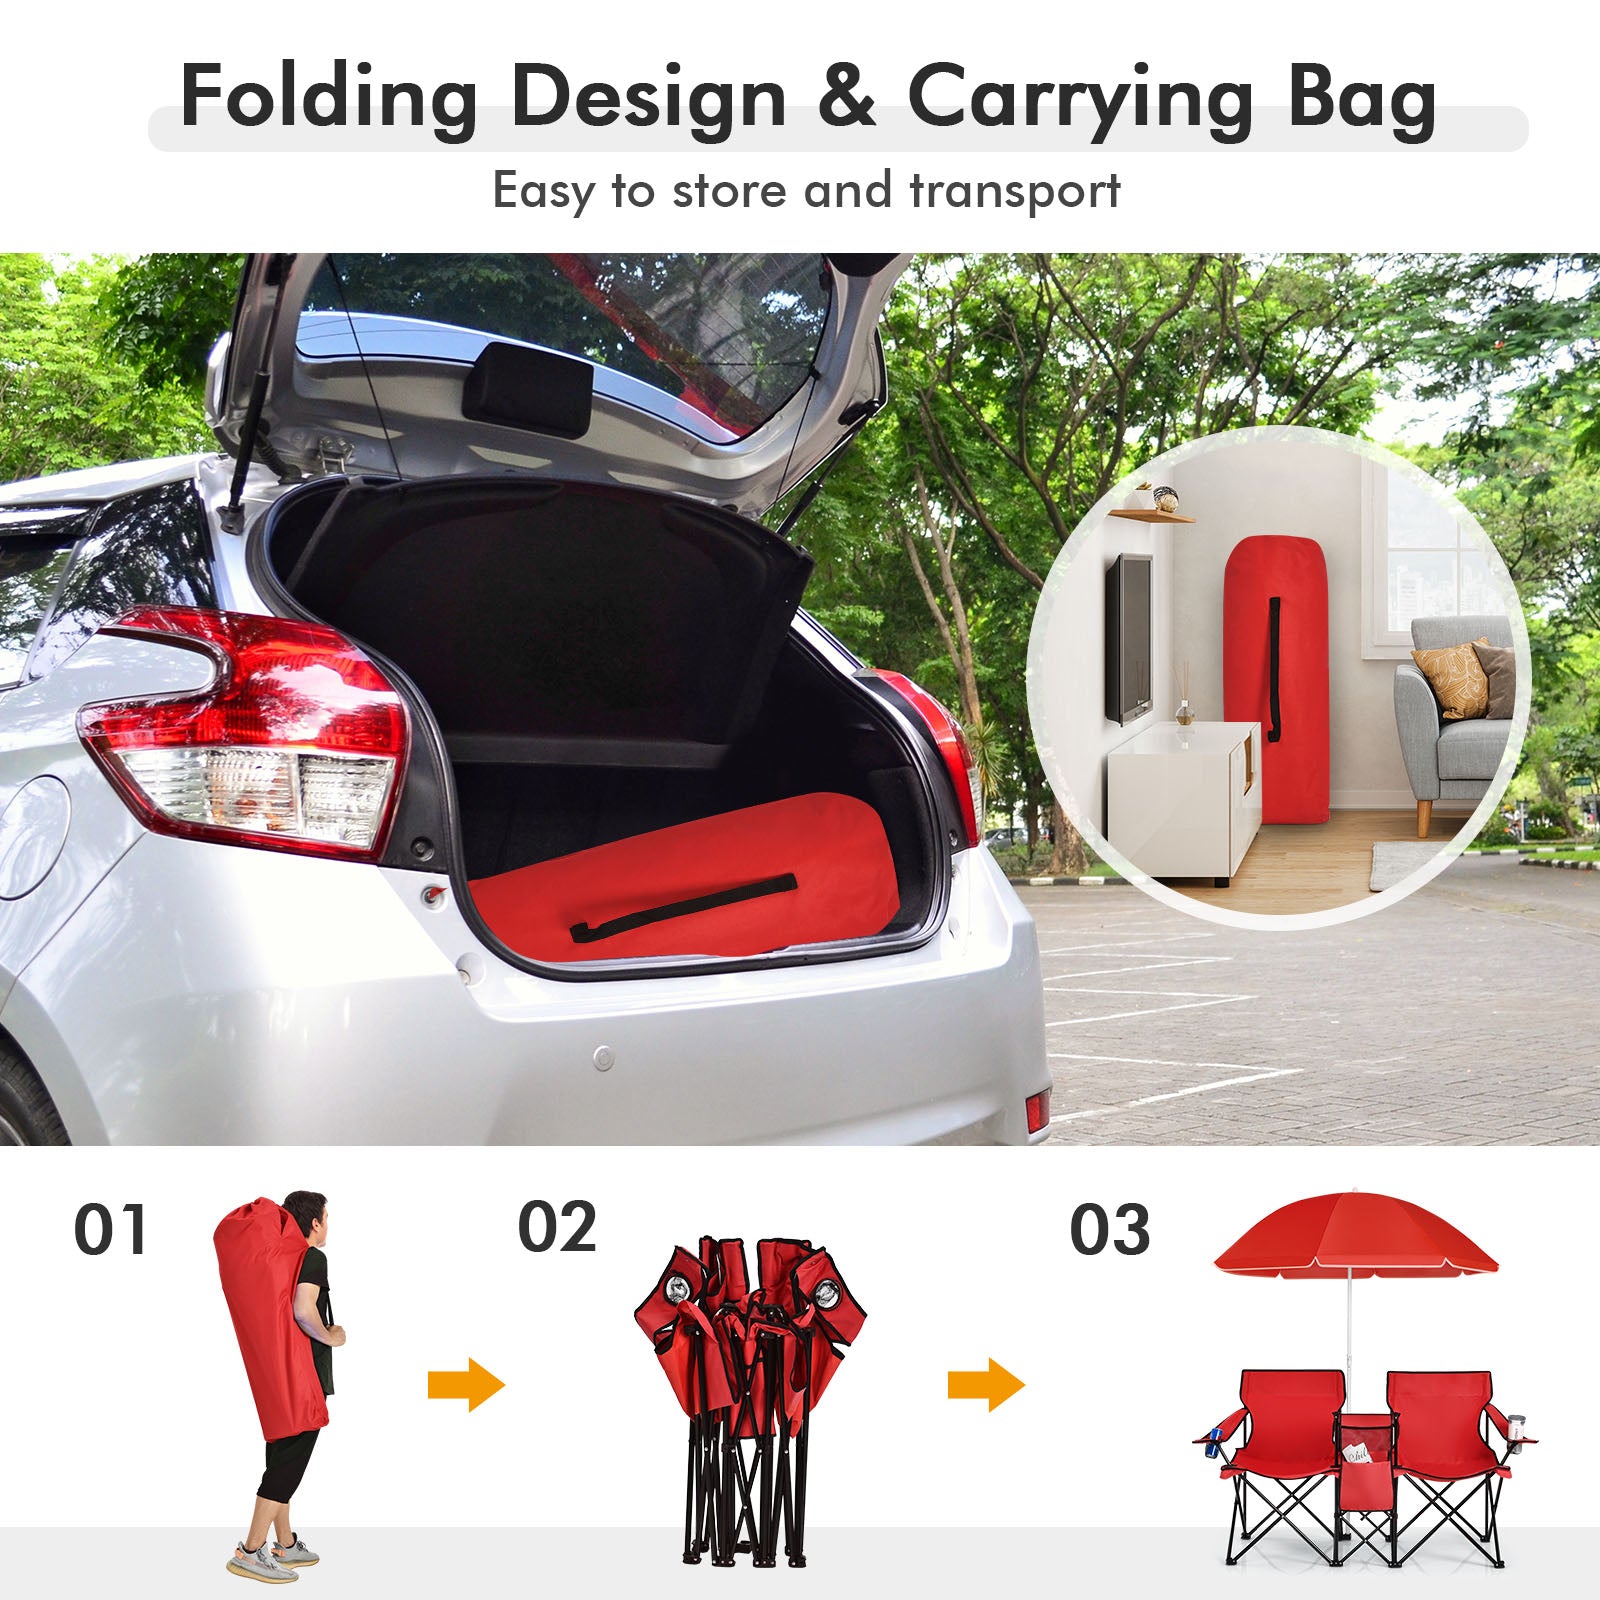 Foldable and Portable Camping Chairs: Both the chairs and umbrella can be effortlessly folded into compact sizes for easy storage and transportation. The included bag allows you to conveniently carry and store the folding picnic chairs and umbrellas, making them ideal for outdoor activities.